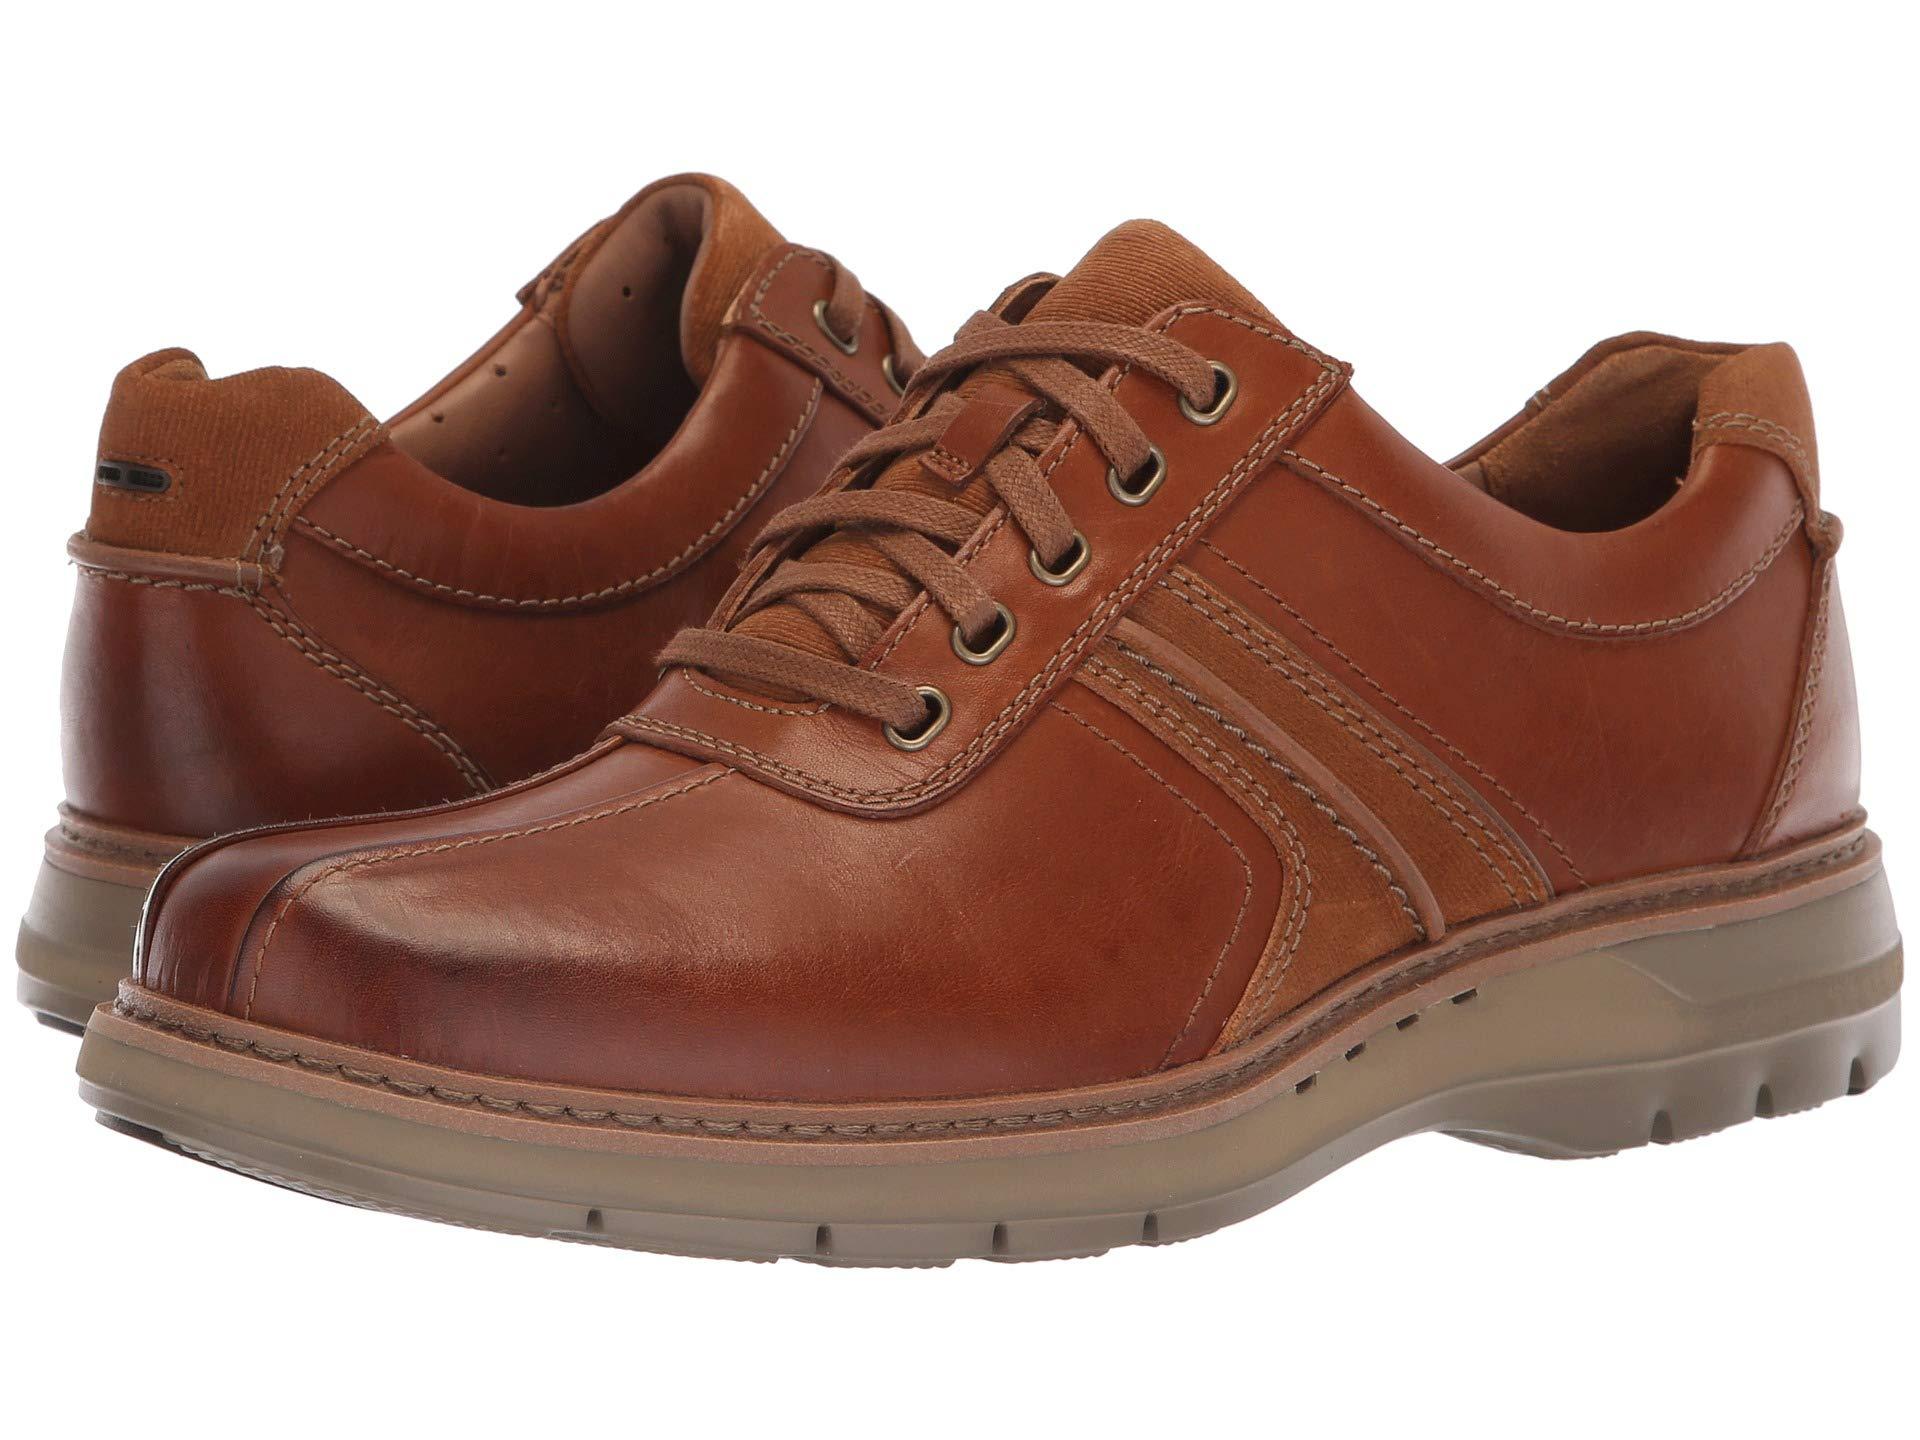 Clarks Leather Un Ramble Go in Dark Tan Leather (Brown) for Men - Save ...